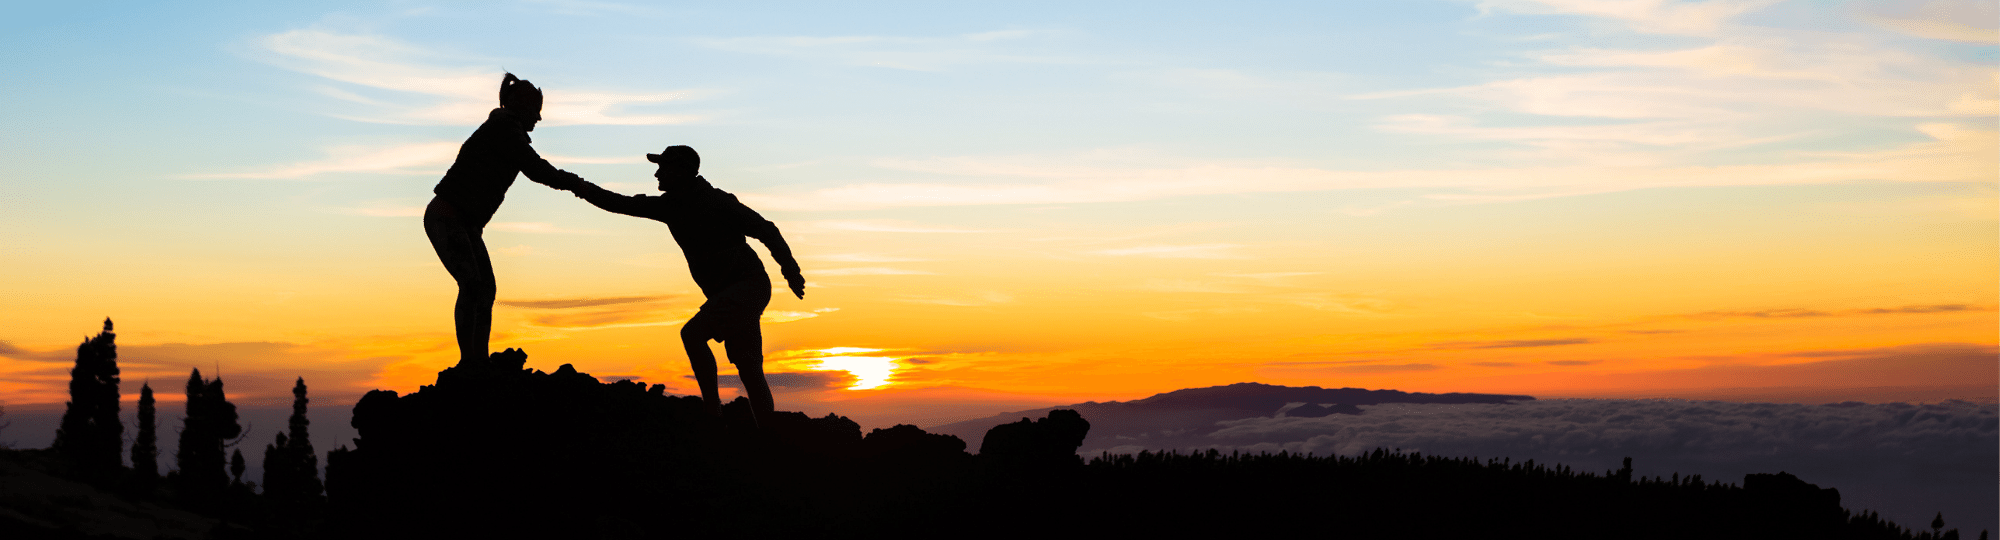 Silhouette of one person helping another to the top of a hill, with sunset behind them